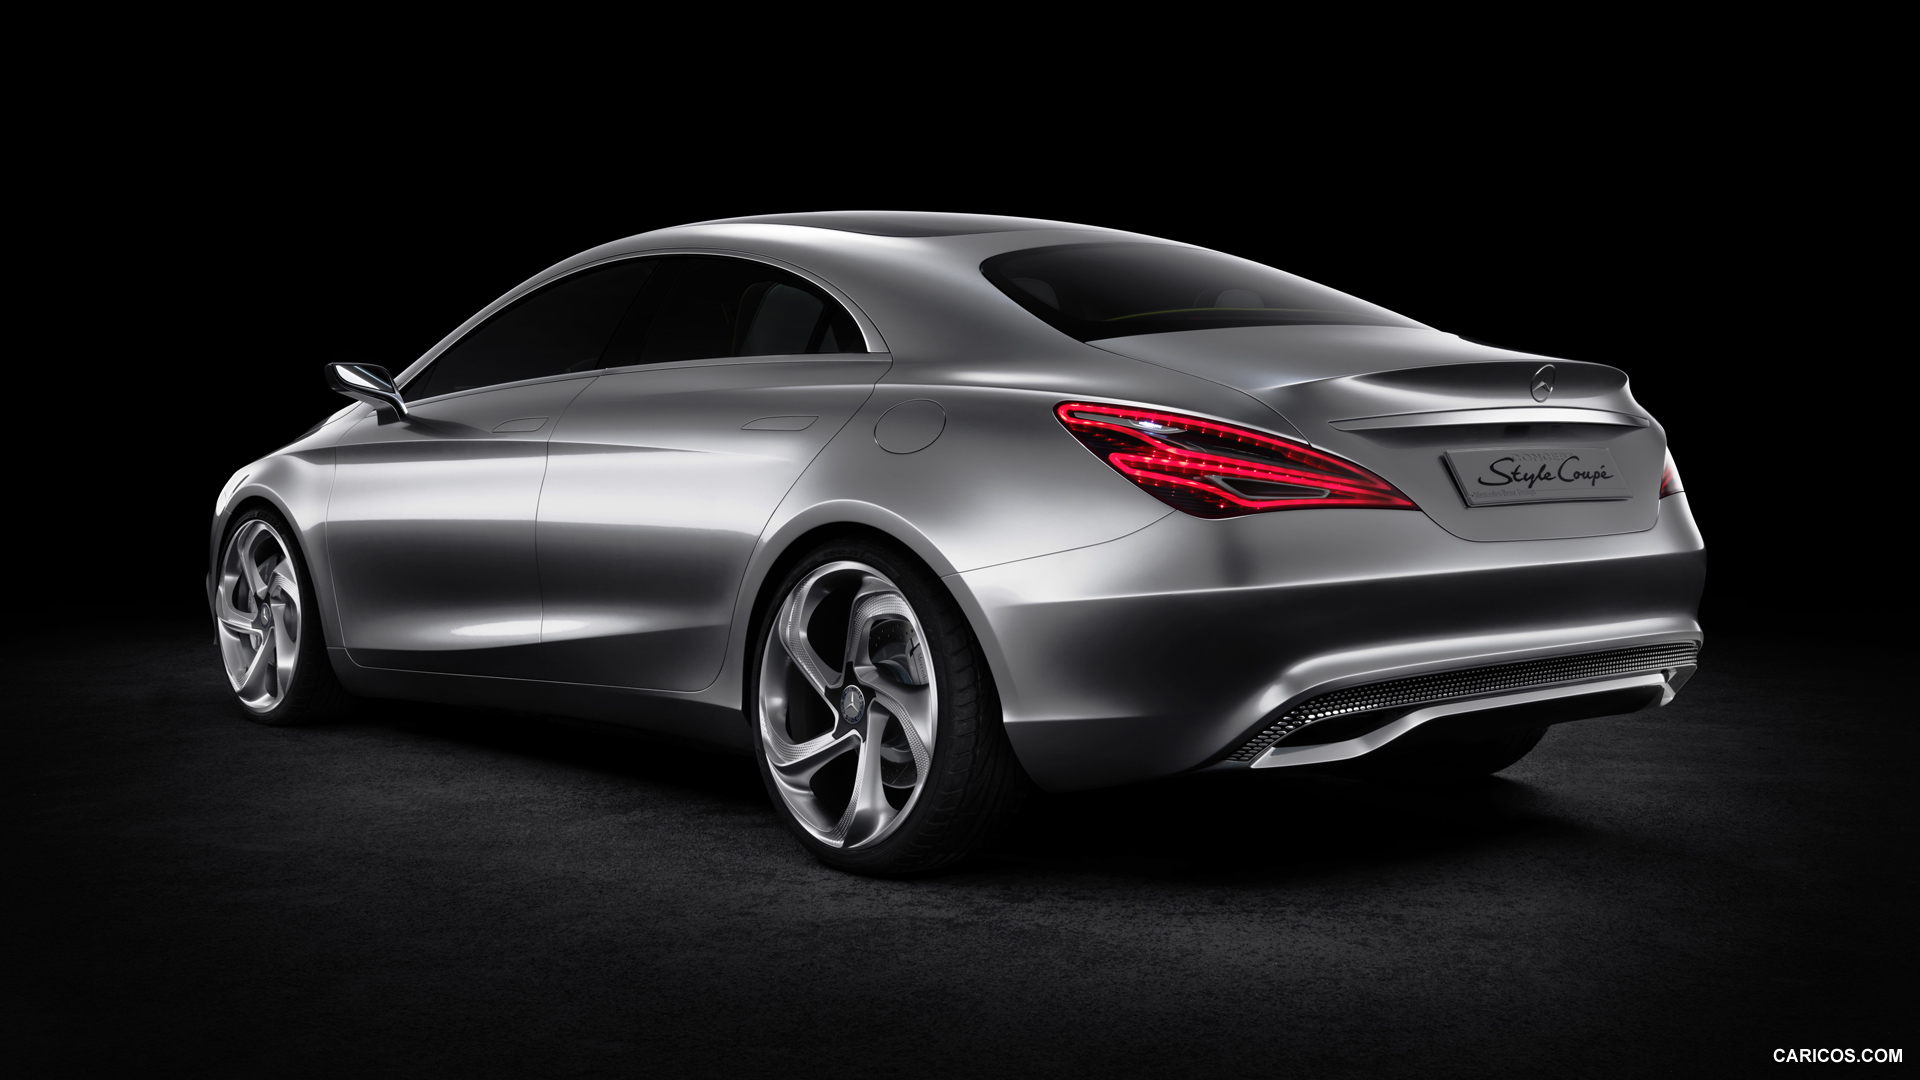 Mercedes-Benz Concept Style Coupe (2012)  - Rear, #21 of 35